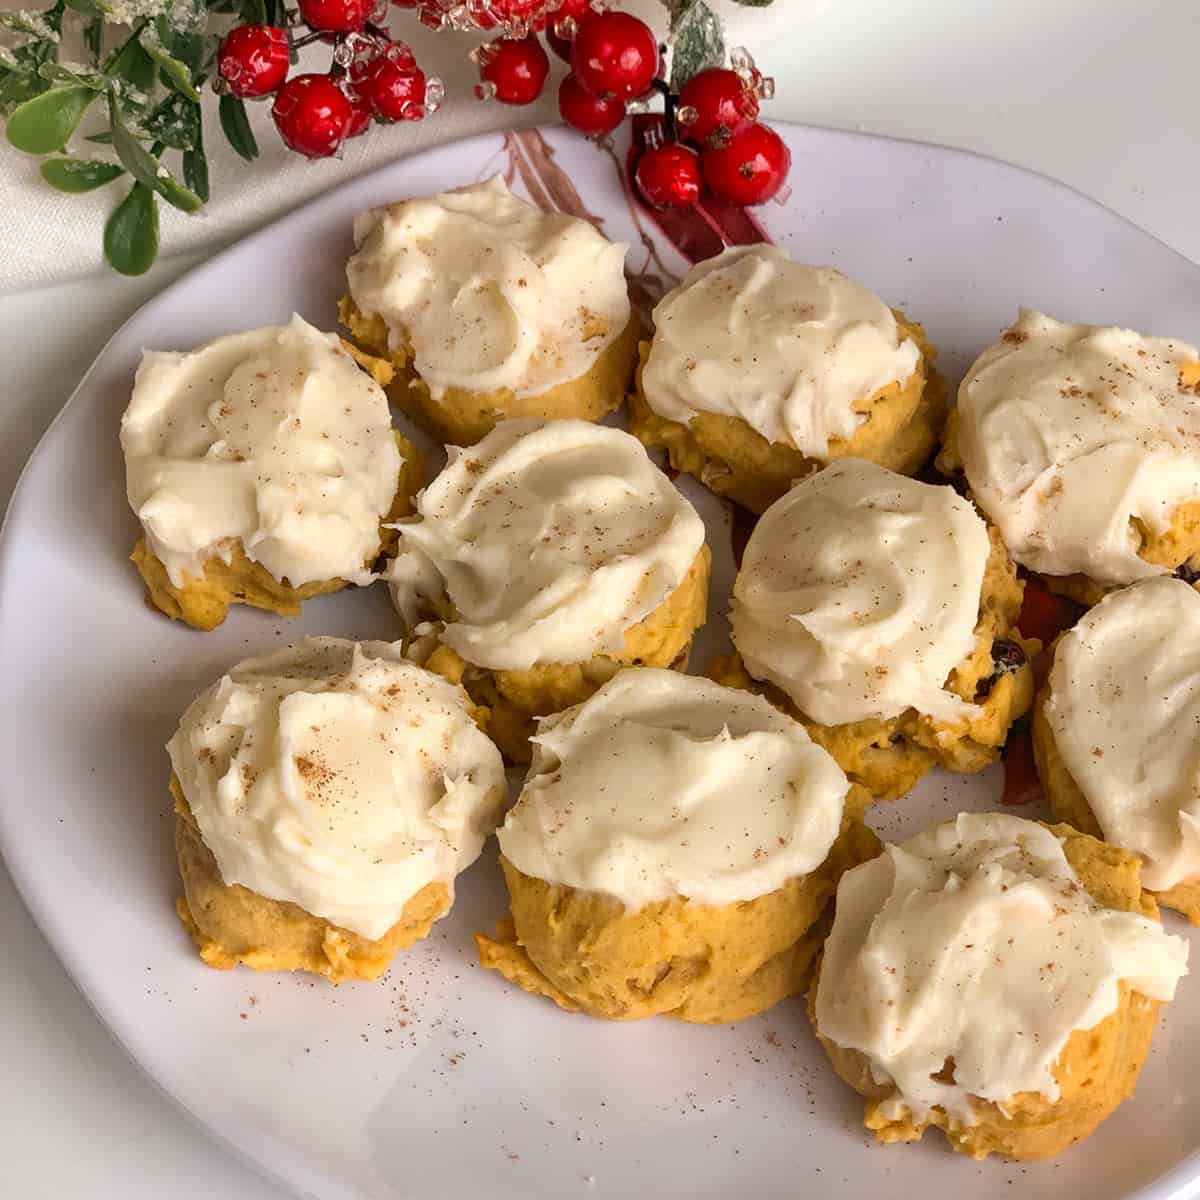 Pumpkin Cranberry Cookies and Cream Cheese Icing on a white plate with a sprig of mistletoe.